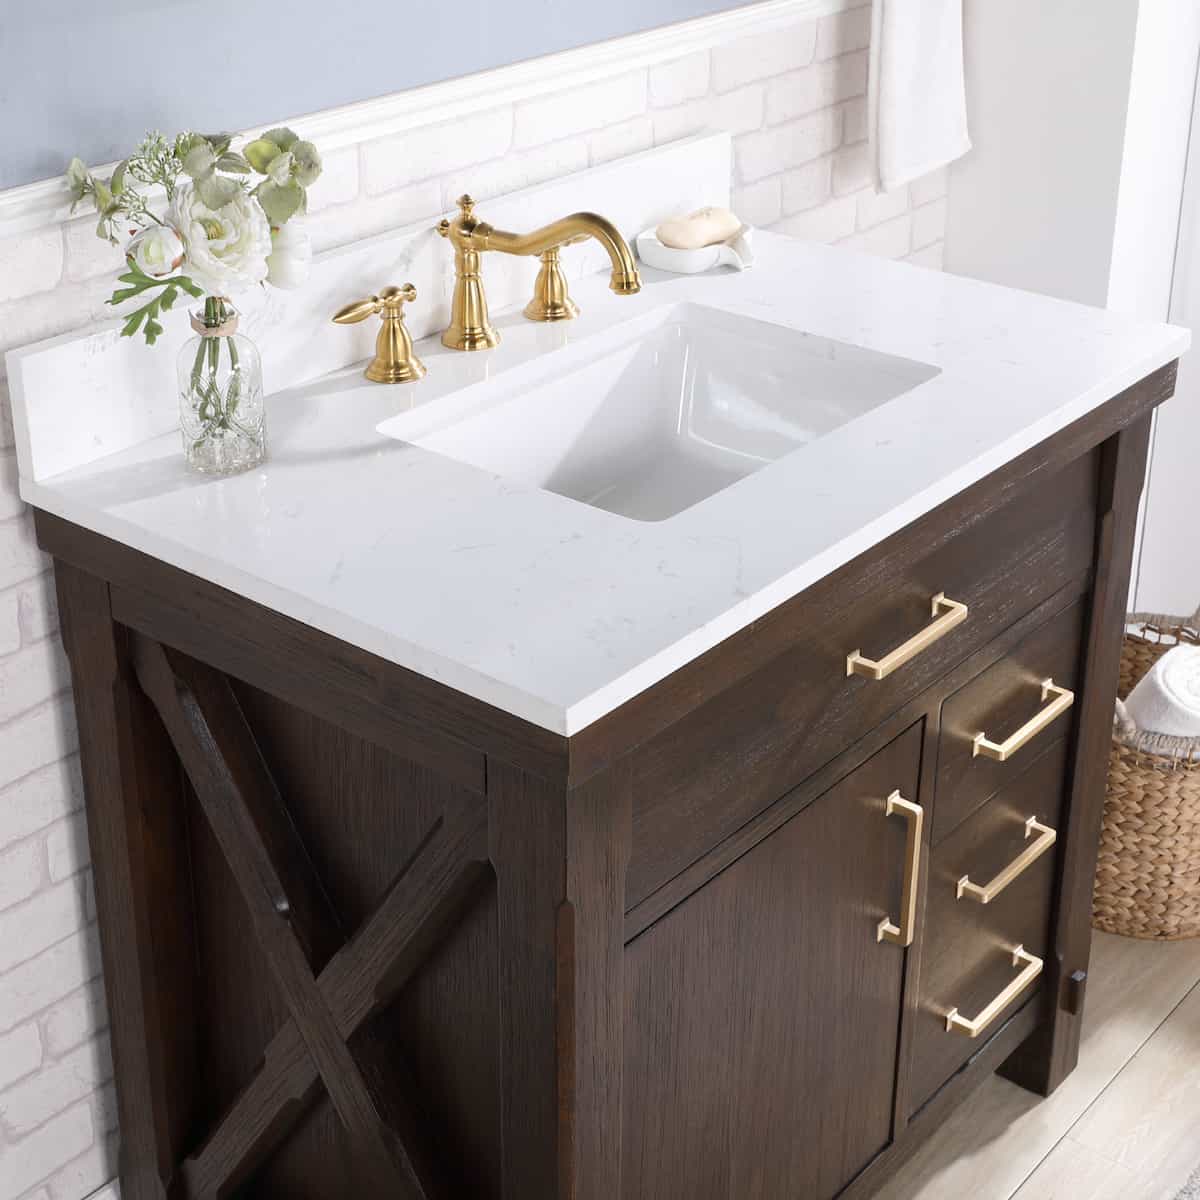 Vinnova Viella 36 Inch Freestanding Single Sink Bath Vanity in Deep Walnut Finish with White Composite Countertop Without Mirror Counter 701836-DW-WS-NM